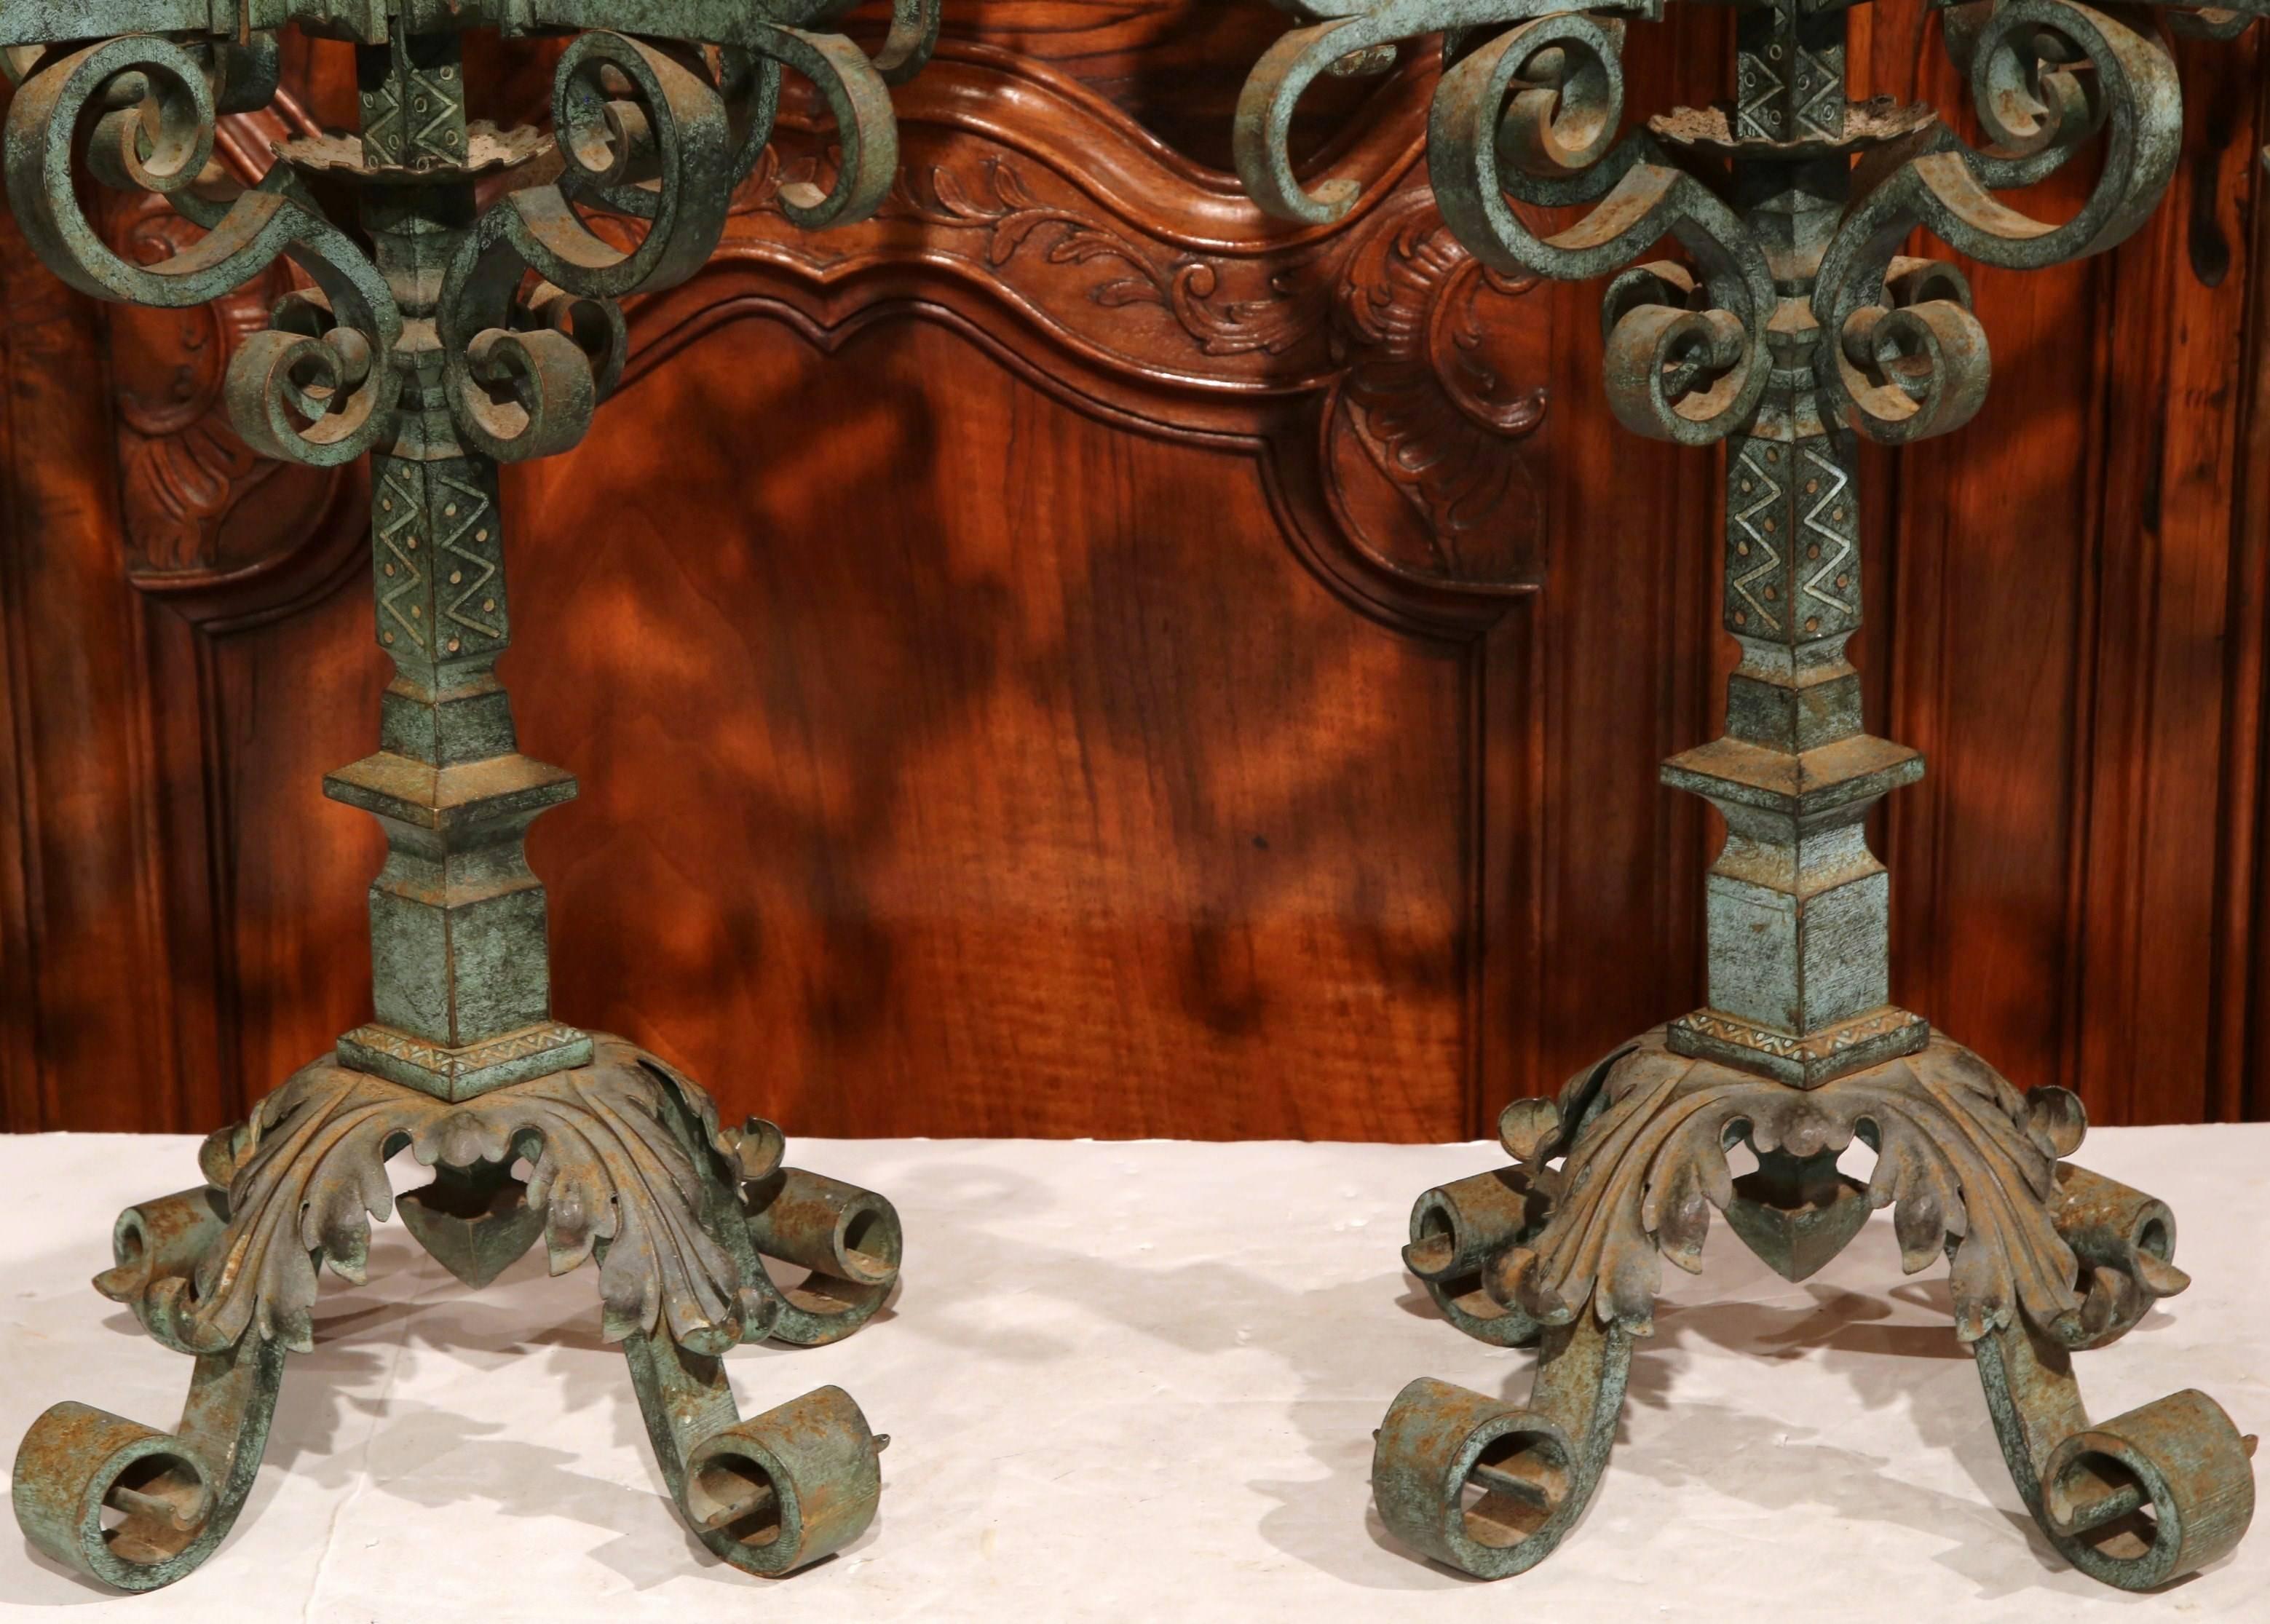 Forged Pair of 18th Century French Iron Candelabras with Original Verdigris Finish